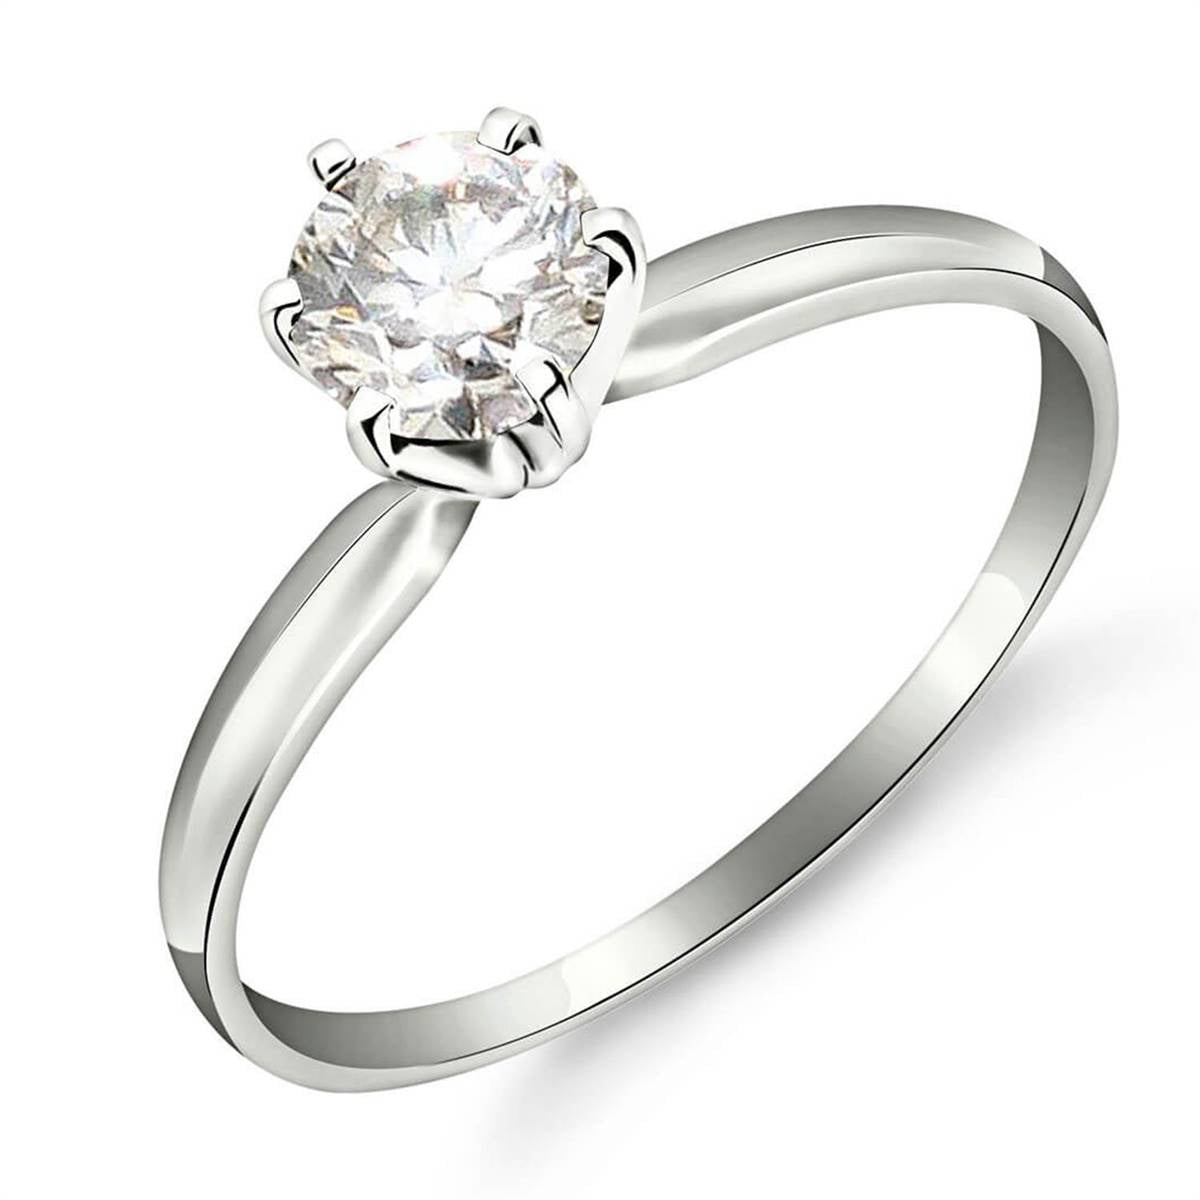 0.5 Carat 14K Solid White Gold Solitaire Ring 0.50 Carat Natural Diamond